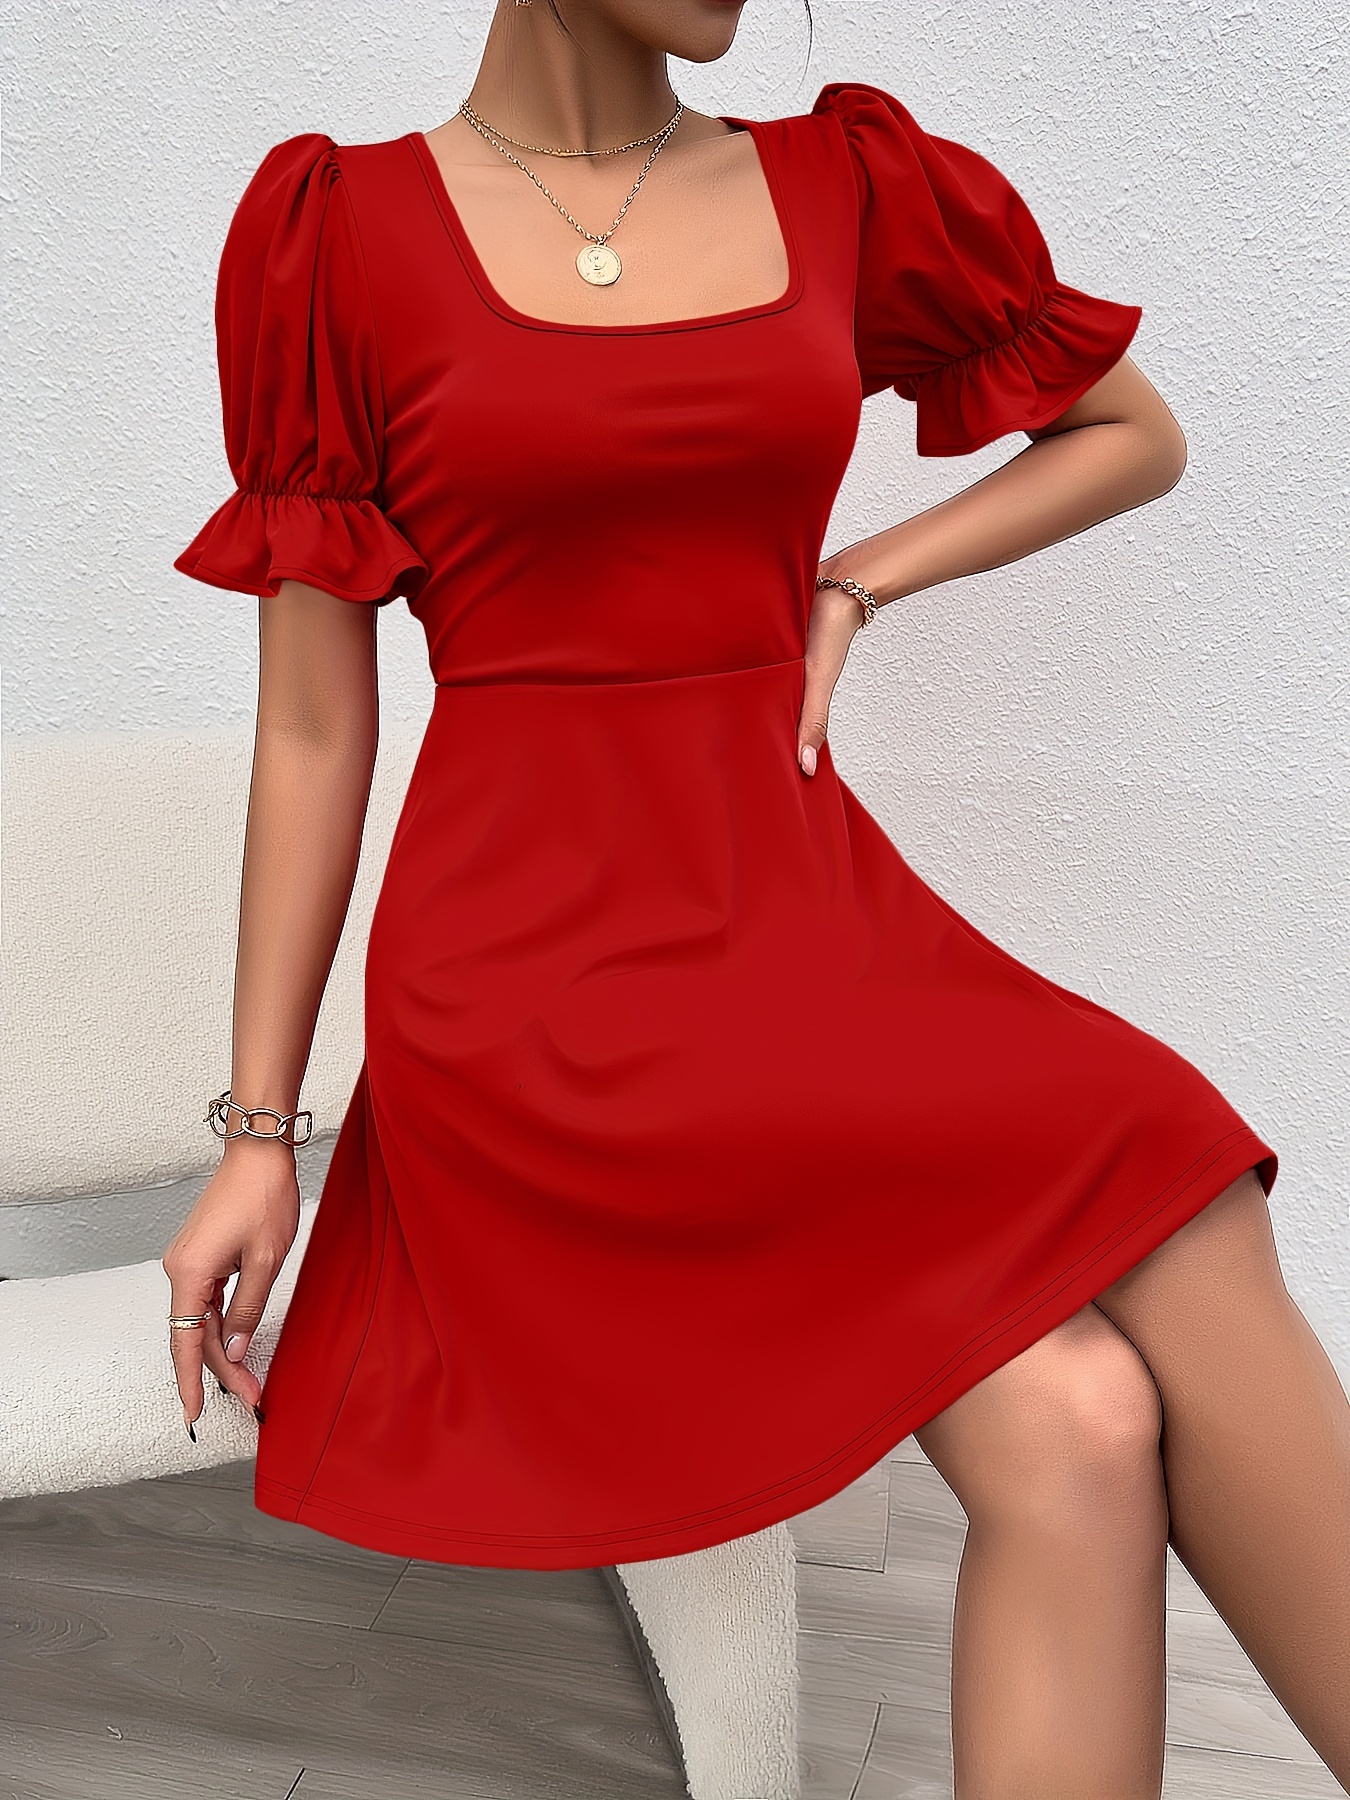 Elegant Party Women Slim V Neck Dress Fashion High Waist Sexy Dress With A  Belt Casual Female Office Lady Solid Red Puff Sleeve